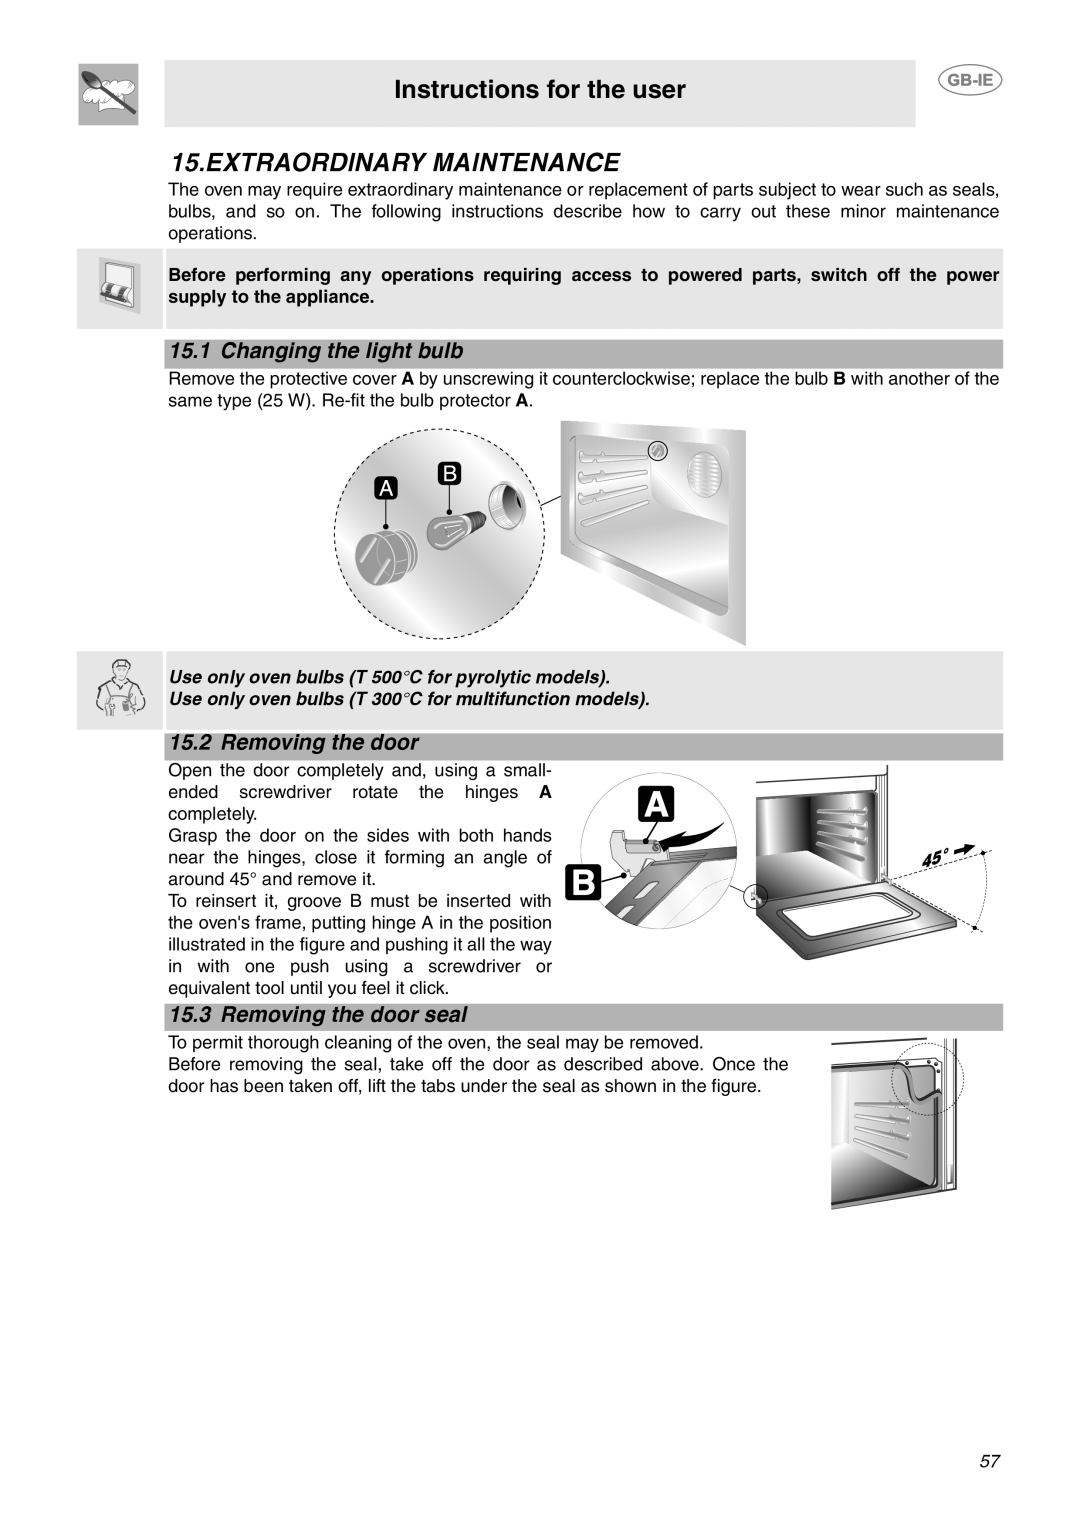 Smeg CE92GPX Extraordinary Maintenance, Changing the light bulb, Removing the door seal, Instructions for the user 